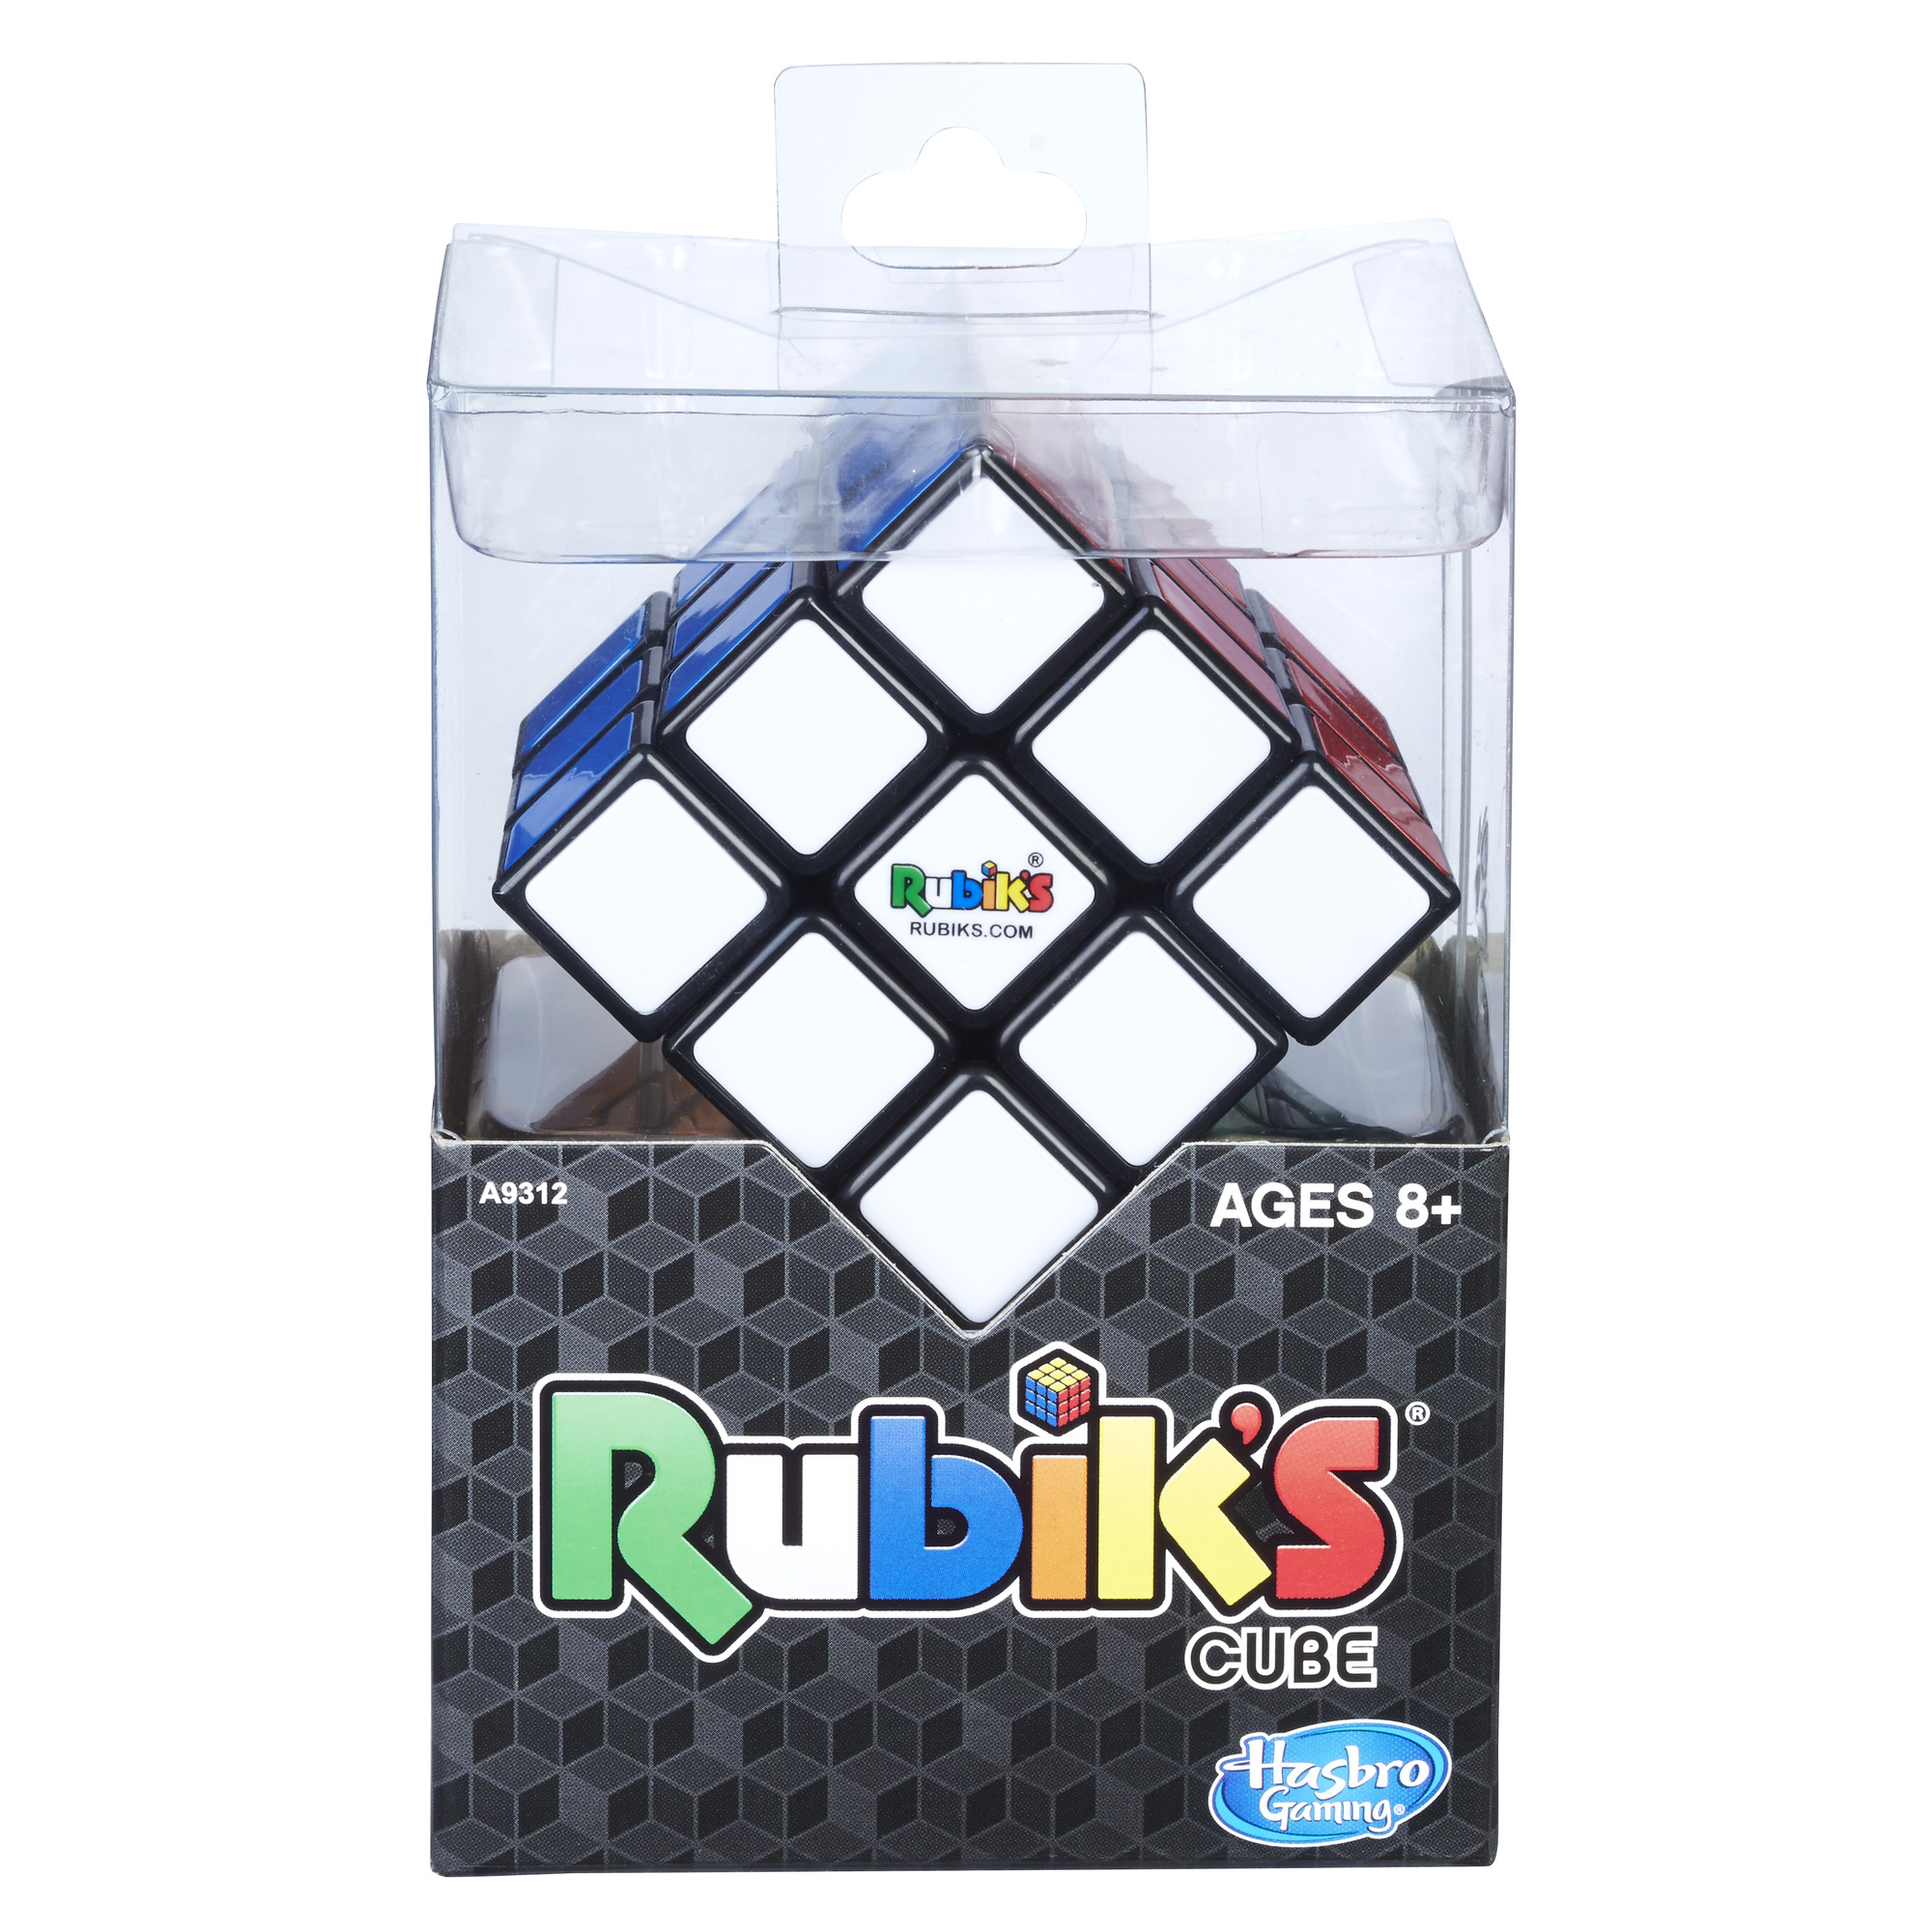 Rubik's Cube 3 x 3 Puzzle Game for Kids Ages 8 and Up - image 1 of 8